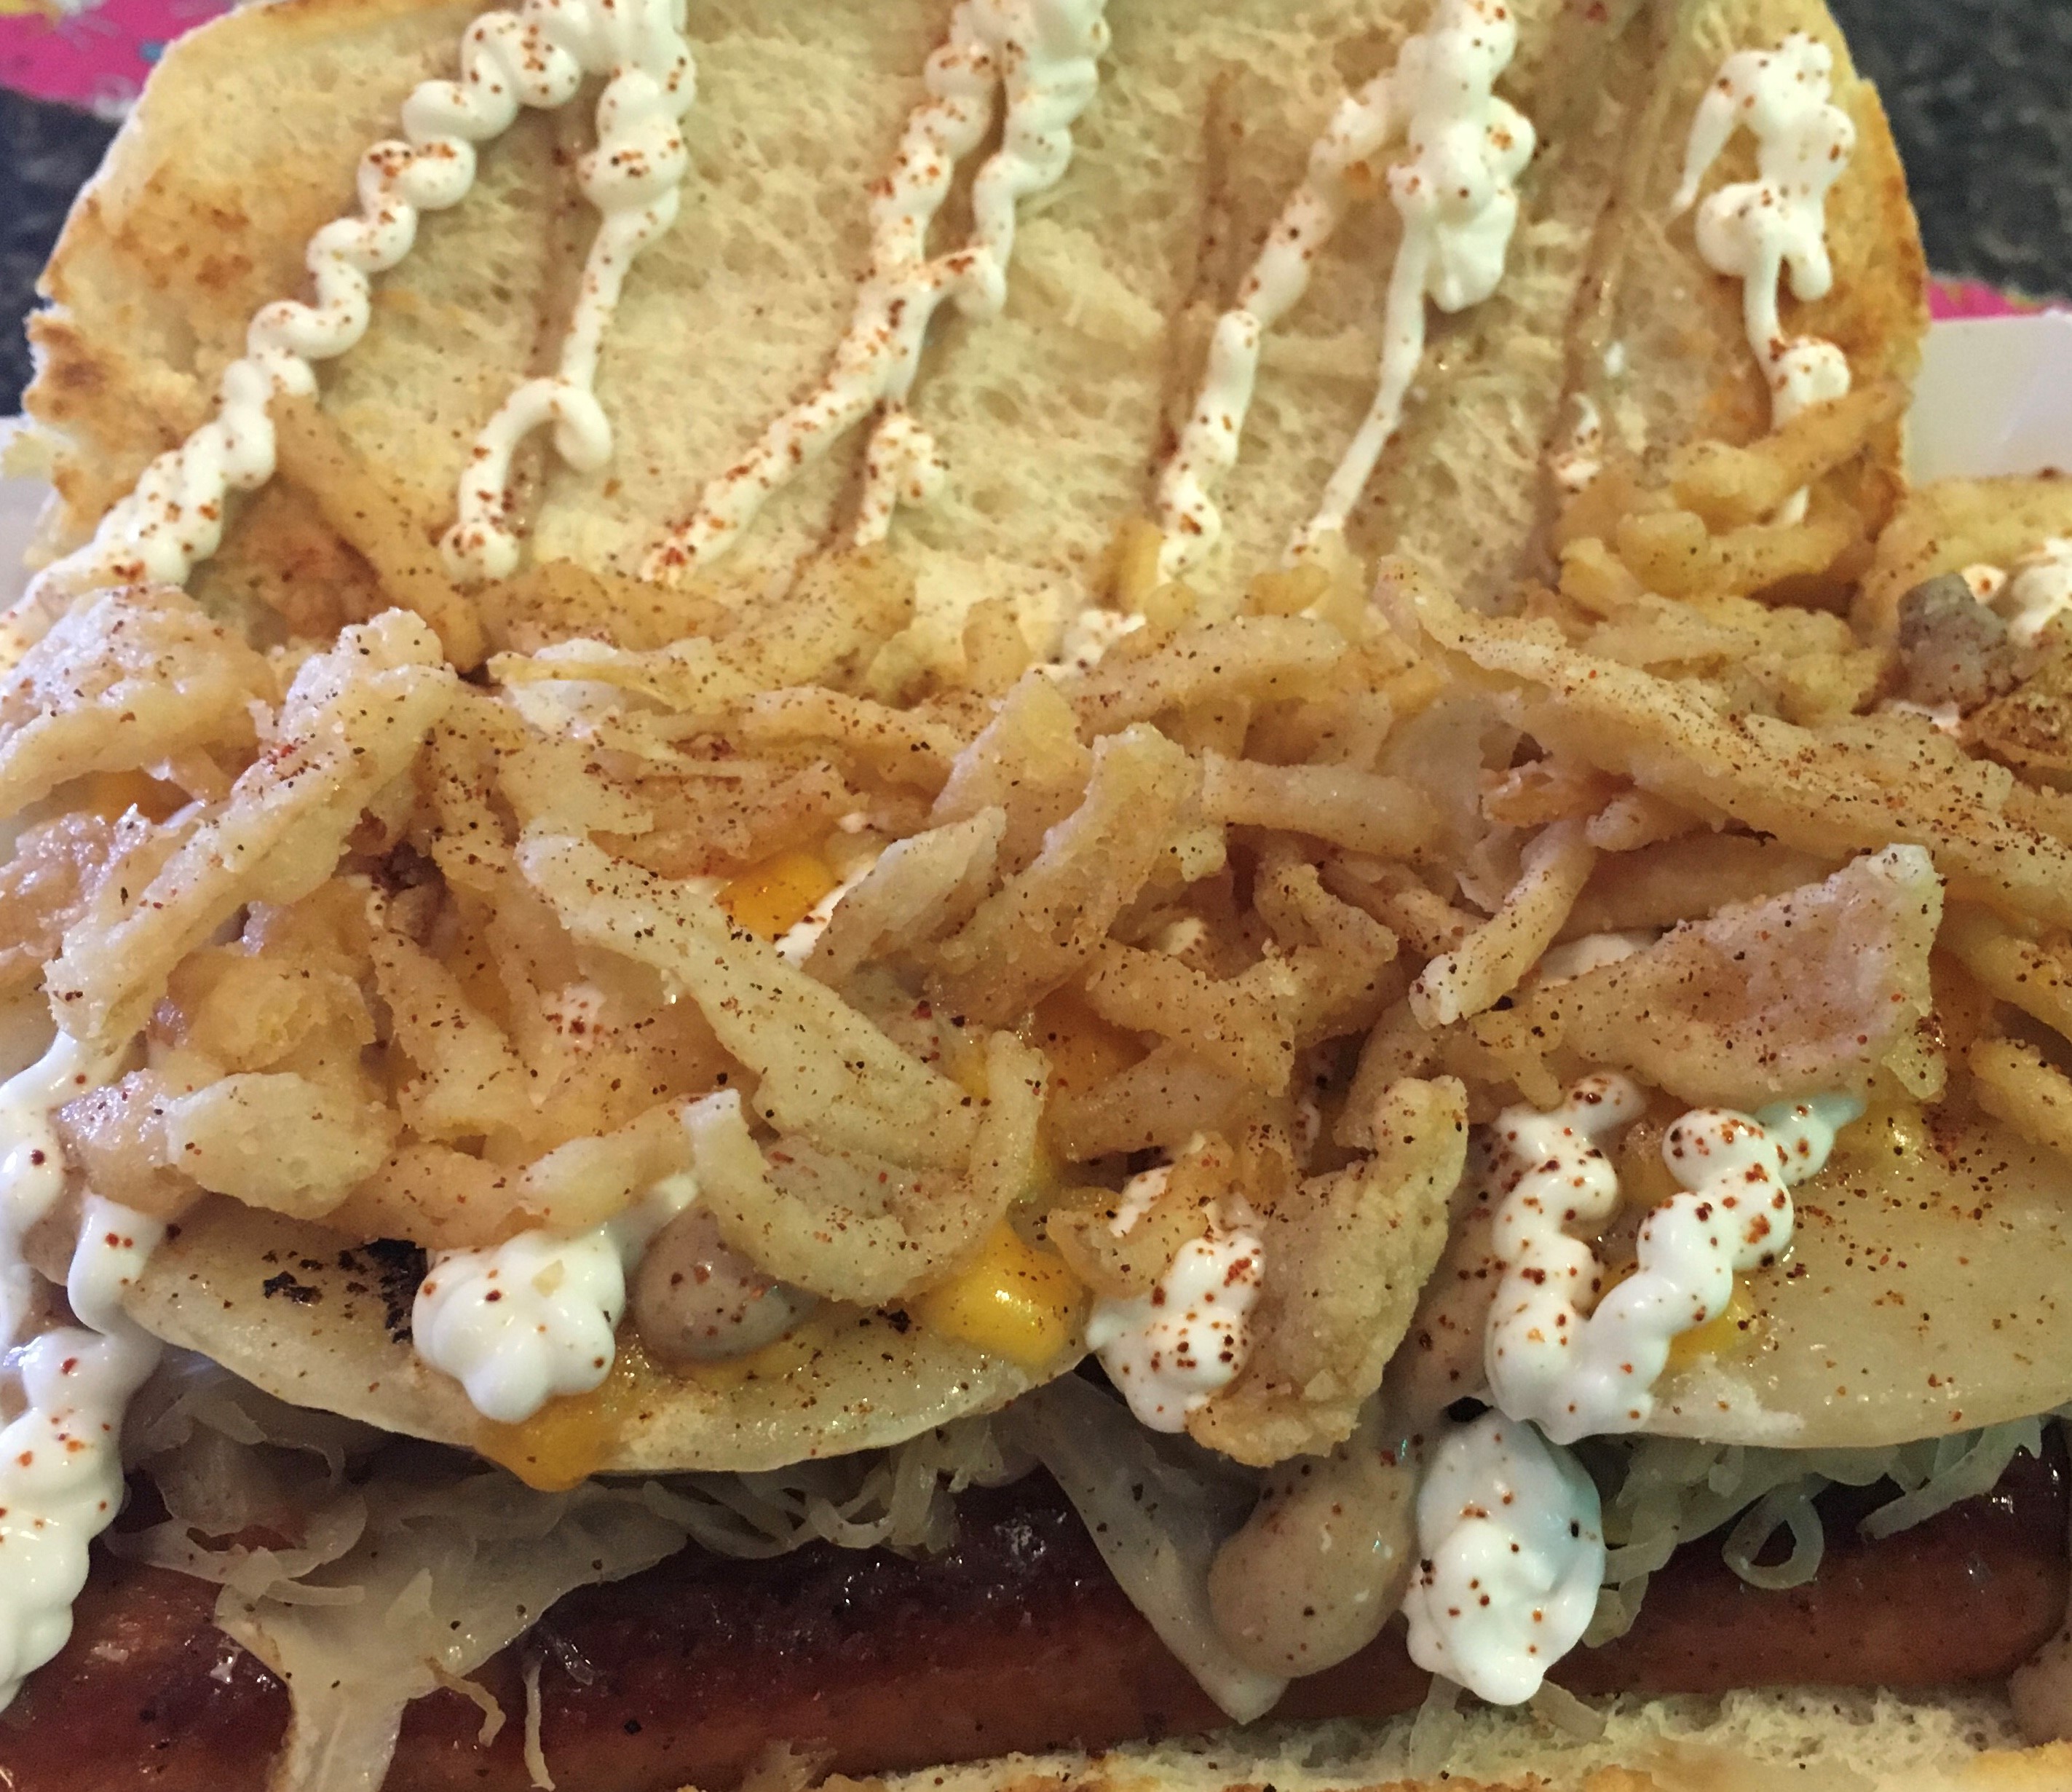 Pictured here: The Yinzer™ featuring Smith’s Andouille Sausage, Pierogis, Kraut, French Fried Onions, Melted Cheddar, Chipotle Seasoning, Stadium Mustard, Sour Cream. Vegetarian Option Available.